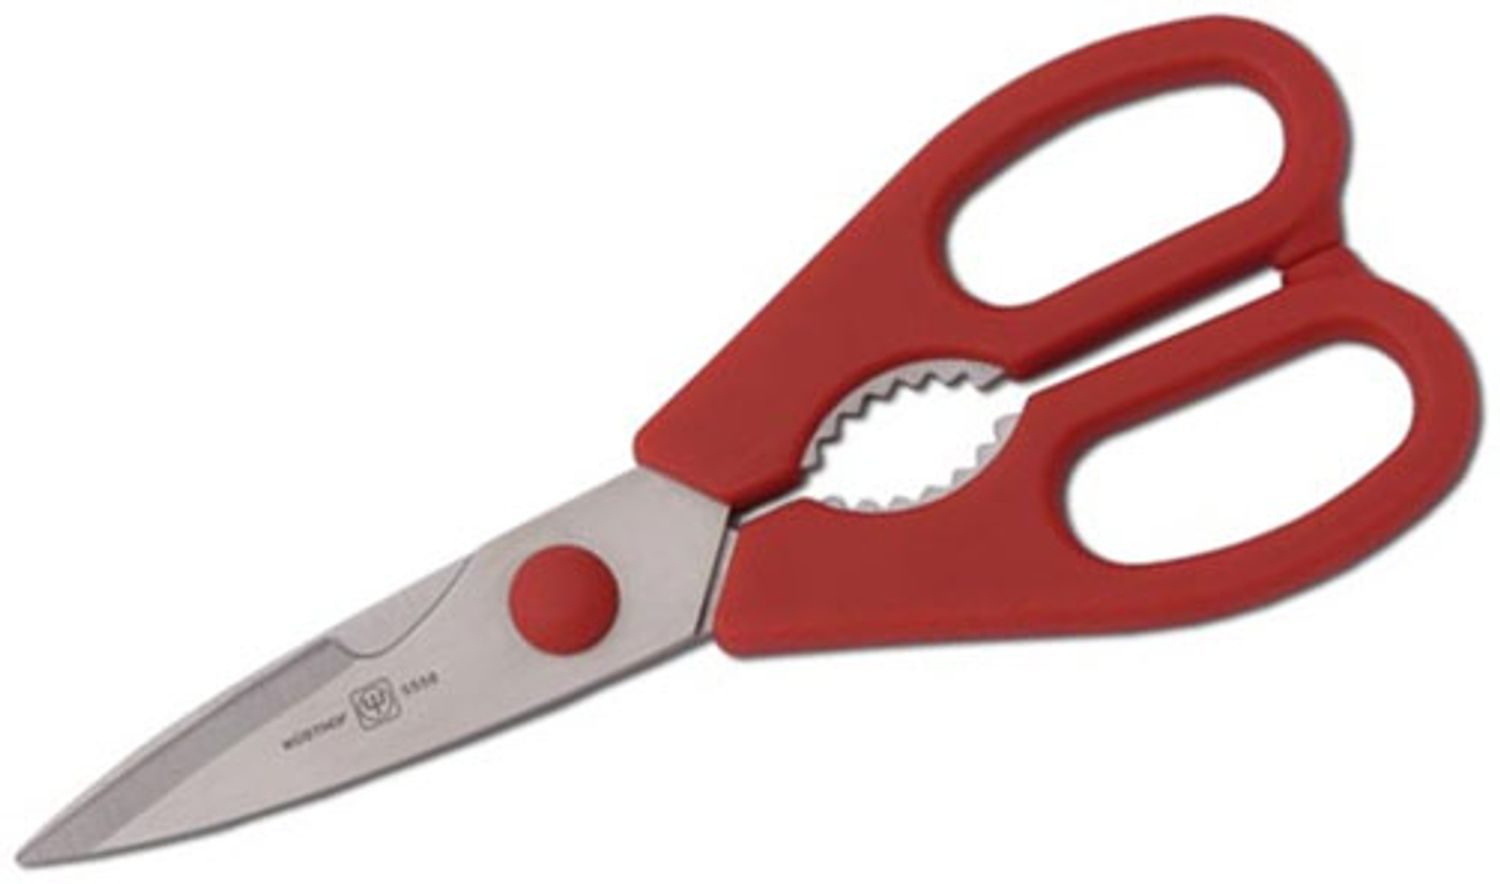 Red 5558-R Cutlery & Dining Wusthof 8 Come-Apart Kitchen Shears